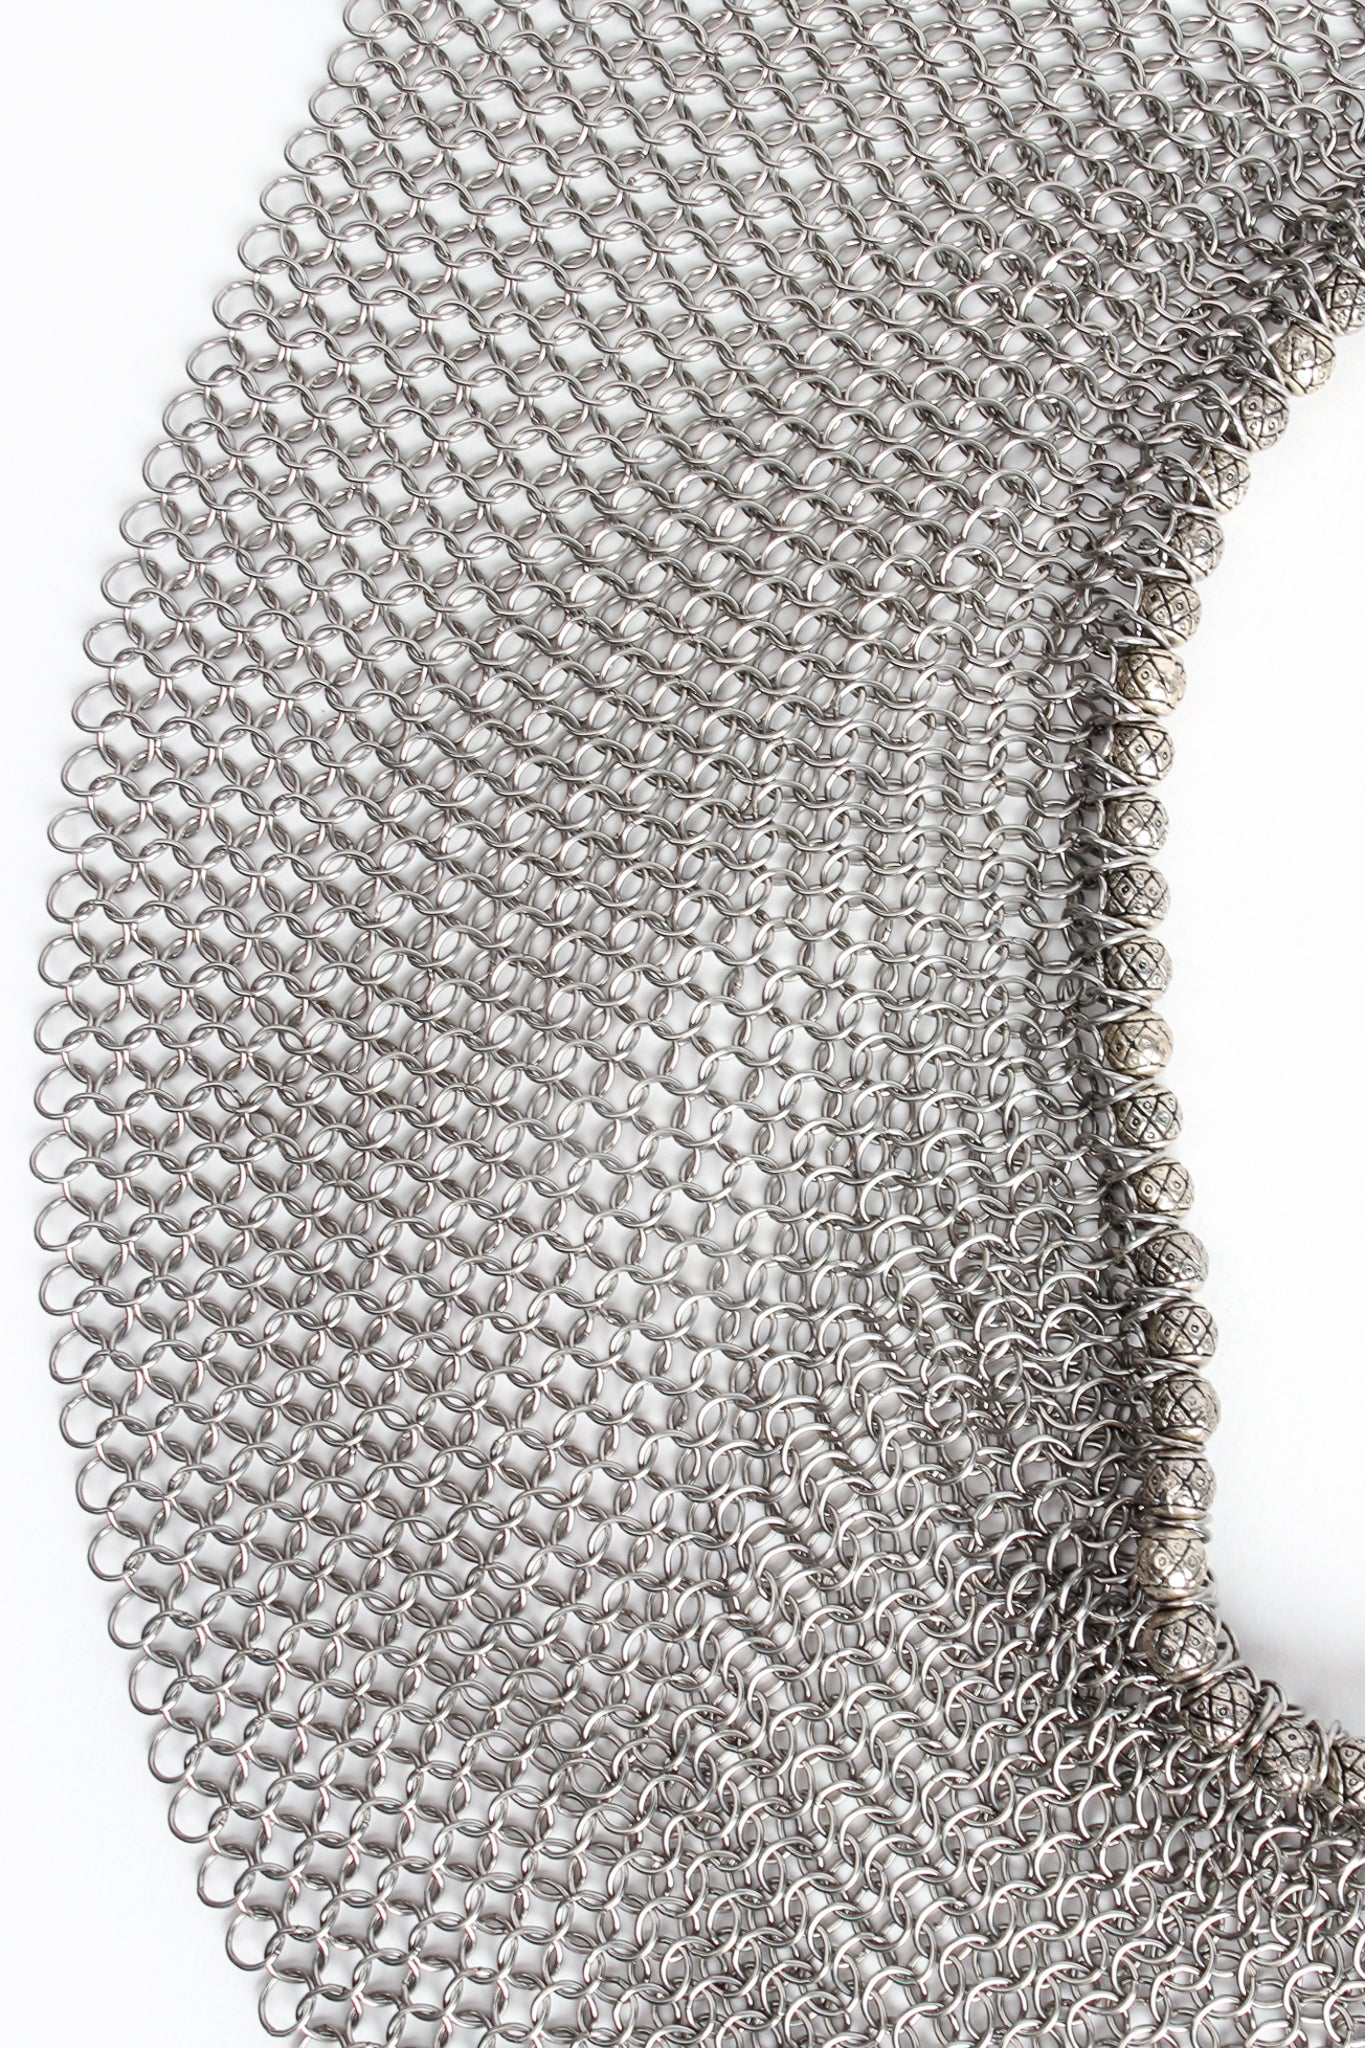 Vintage Anthony Ferrara Pewter Ring Mesh Collar Necklace hangtag at Recess Los Angeles